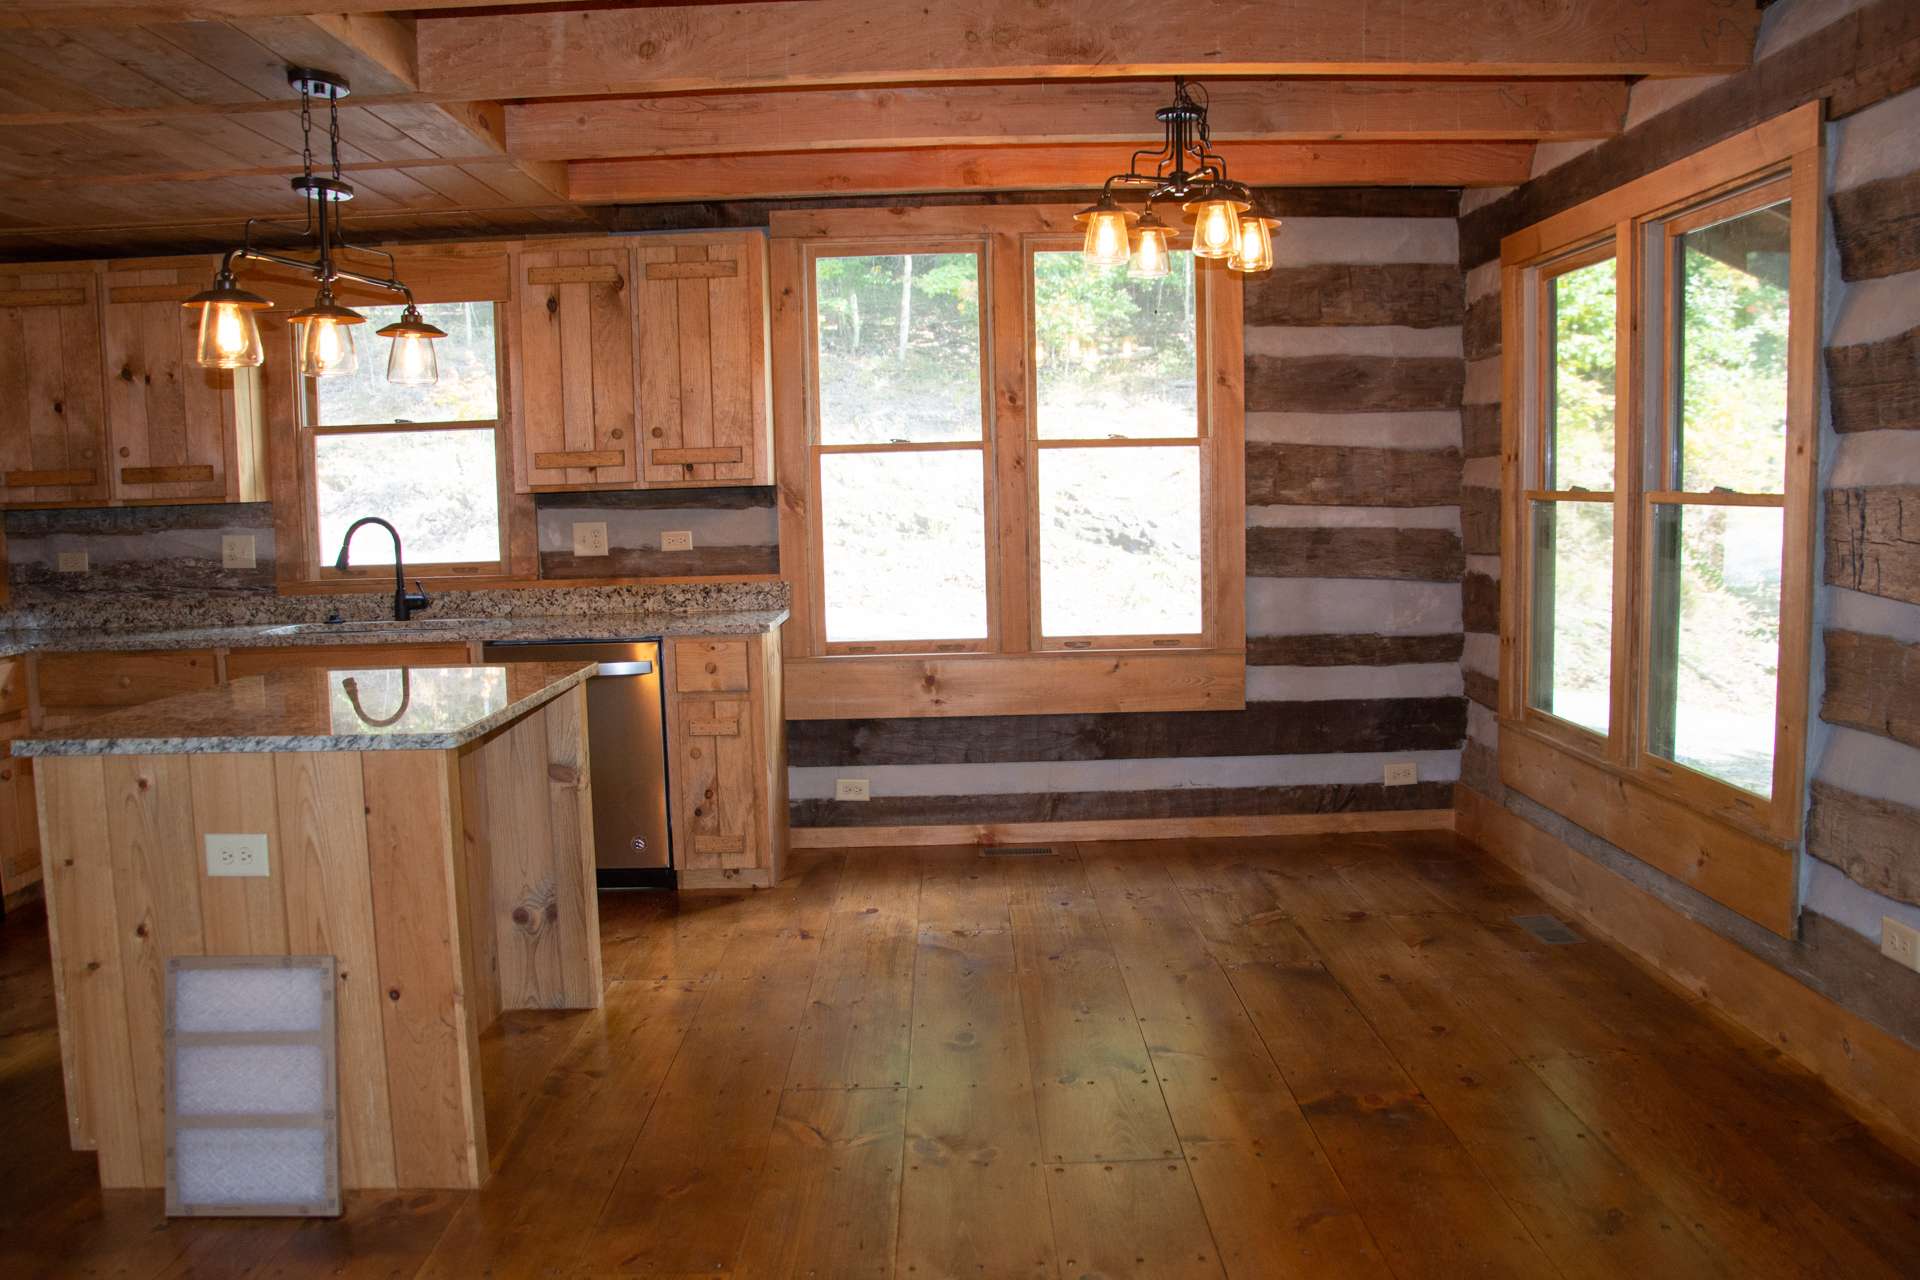 The dining area offers plenty of light and allows you to enjoy the outdoor scenery while dining inside.  This log cabin offers wide plank pine flooring throughout.